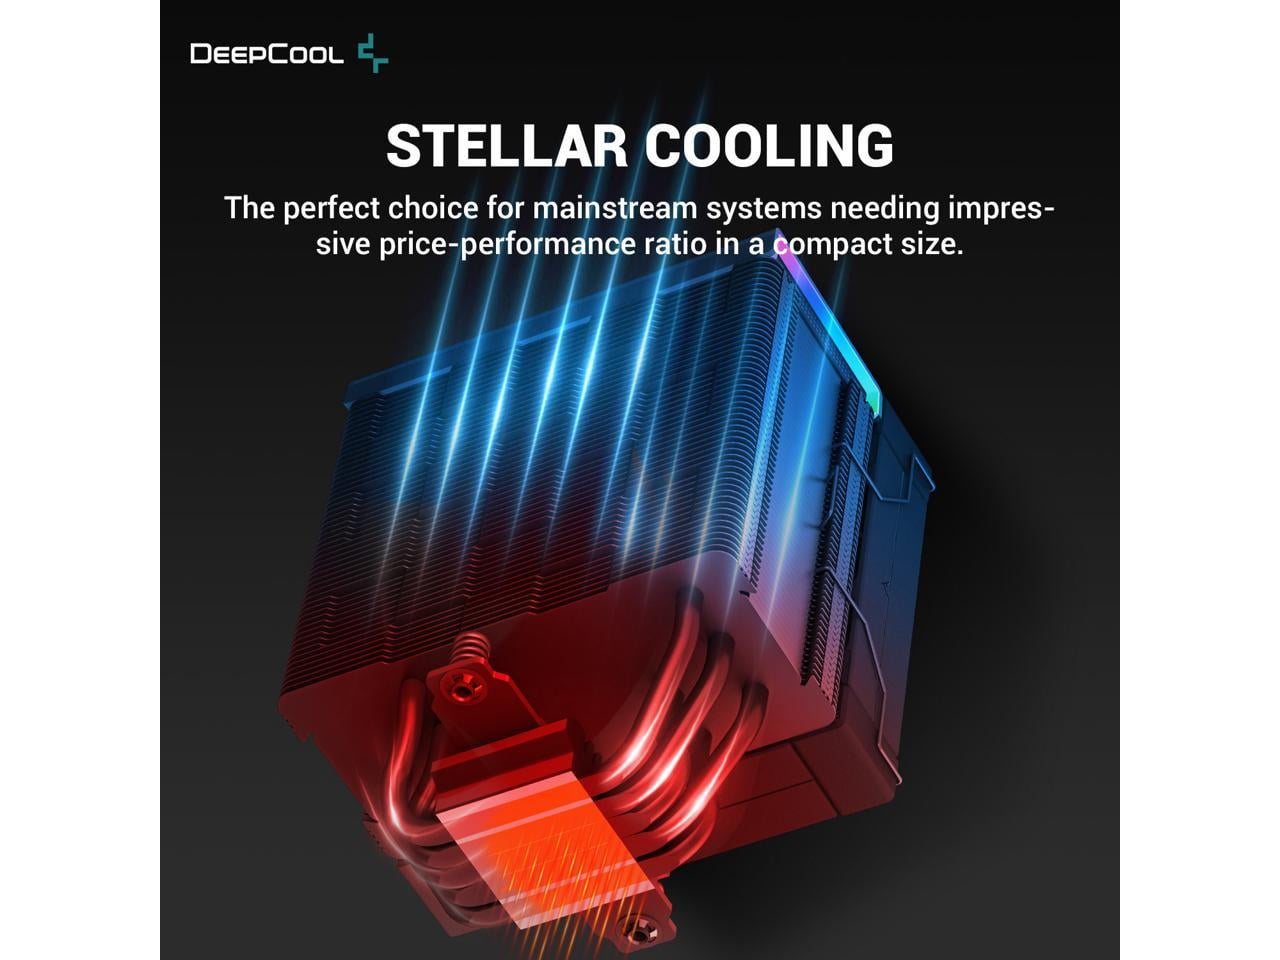 DeepCool AK500S DIGITAL Air Cooler, Single Tower, Real-Time CPU Status  Screen, 5 Offset Copper Heat Pipes, All Black Design 